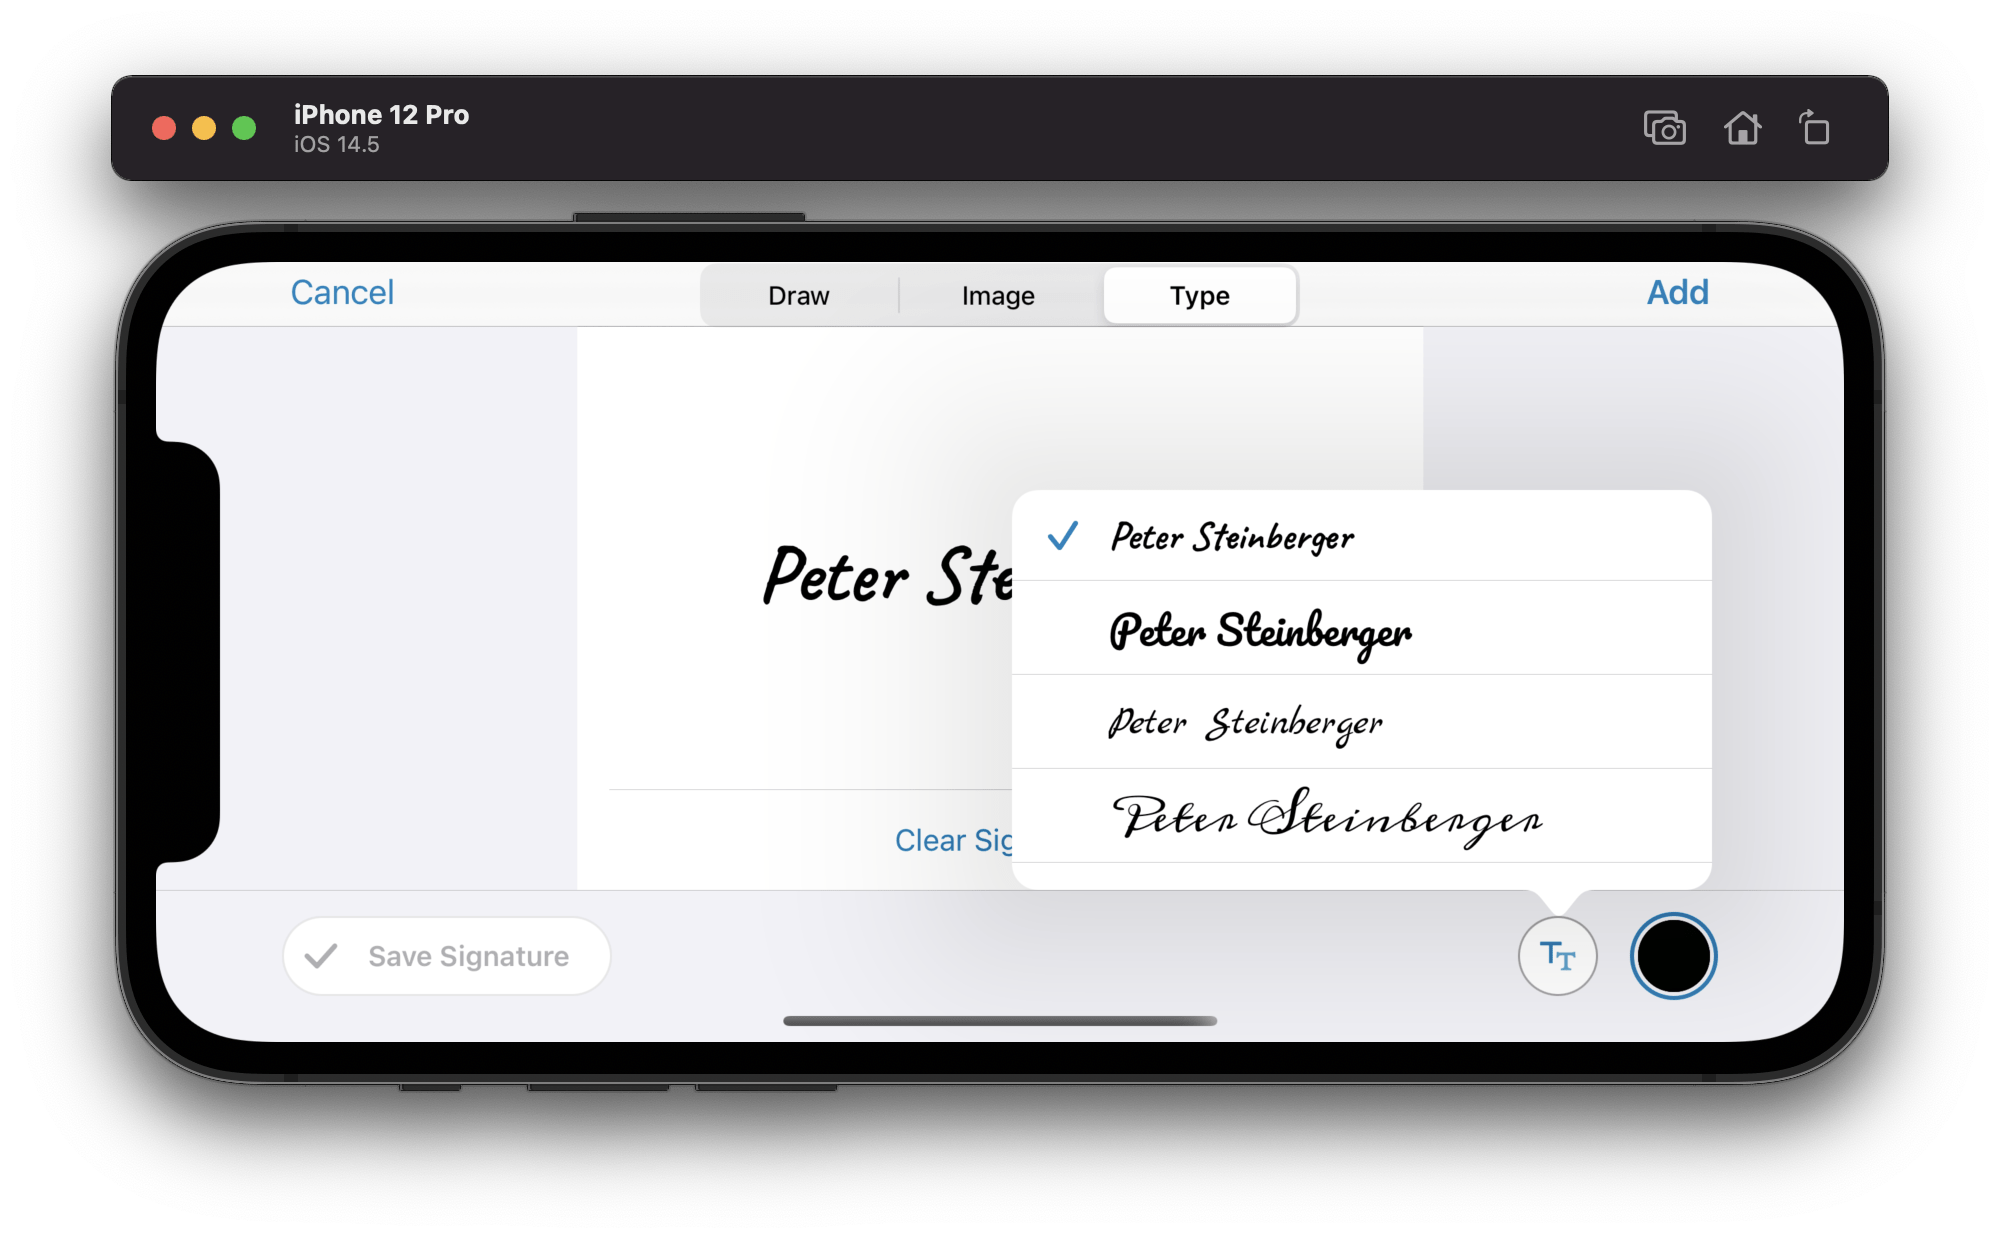 iPhone in landscape mode showing the new Electronic Signature feature